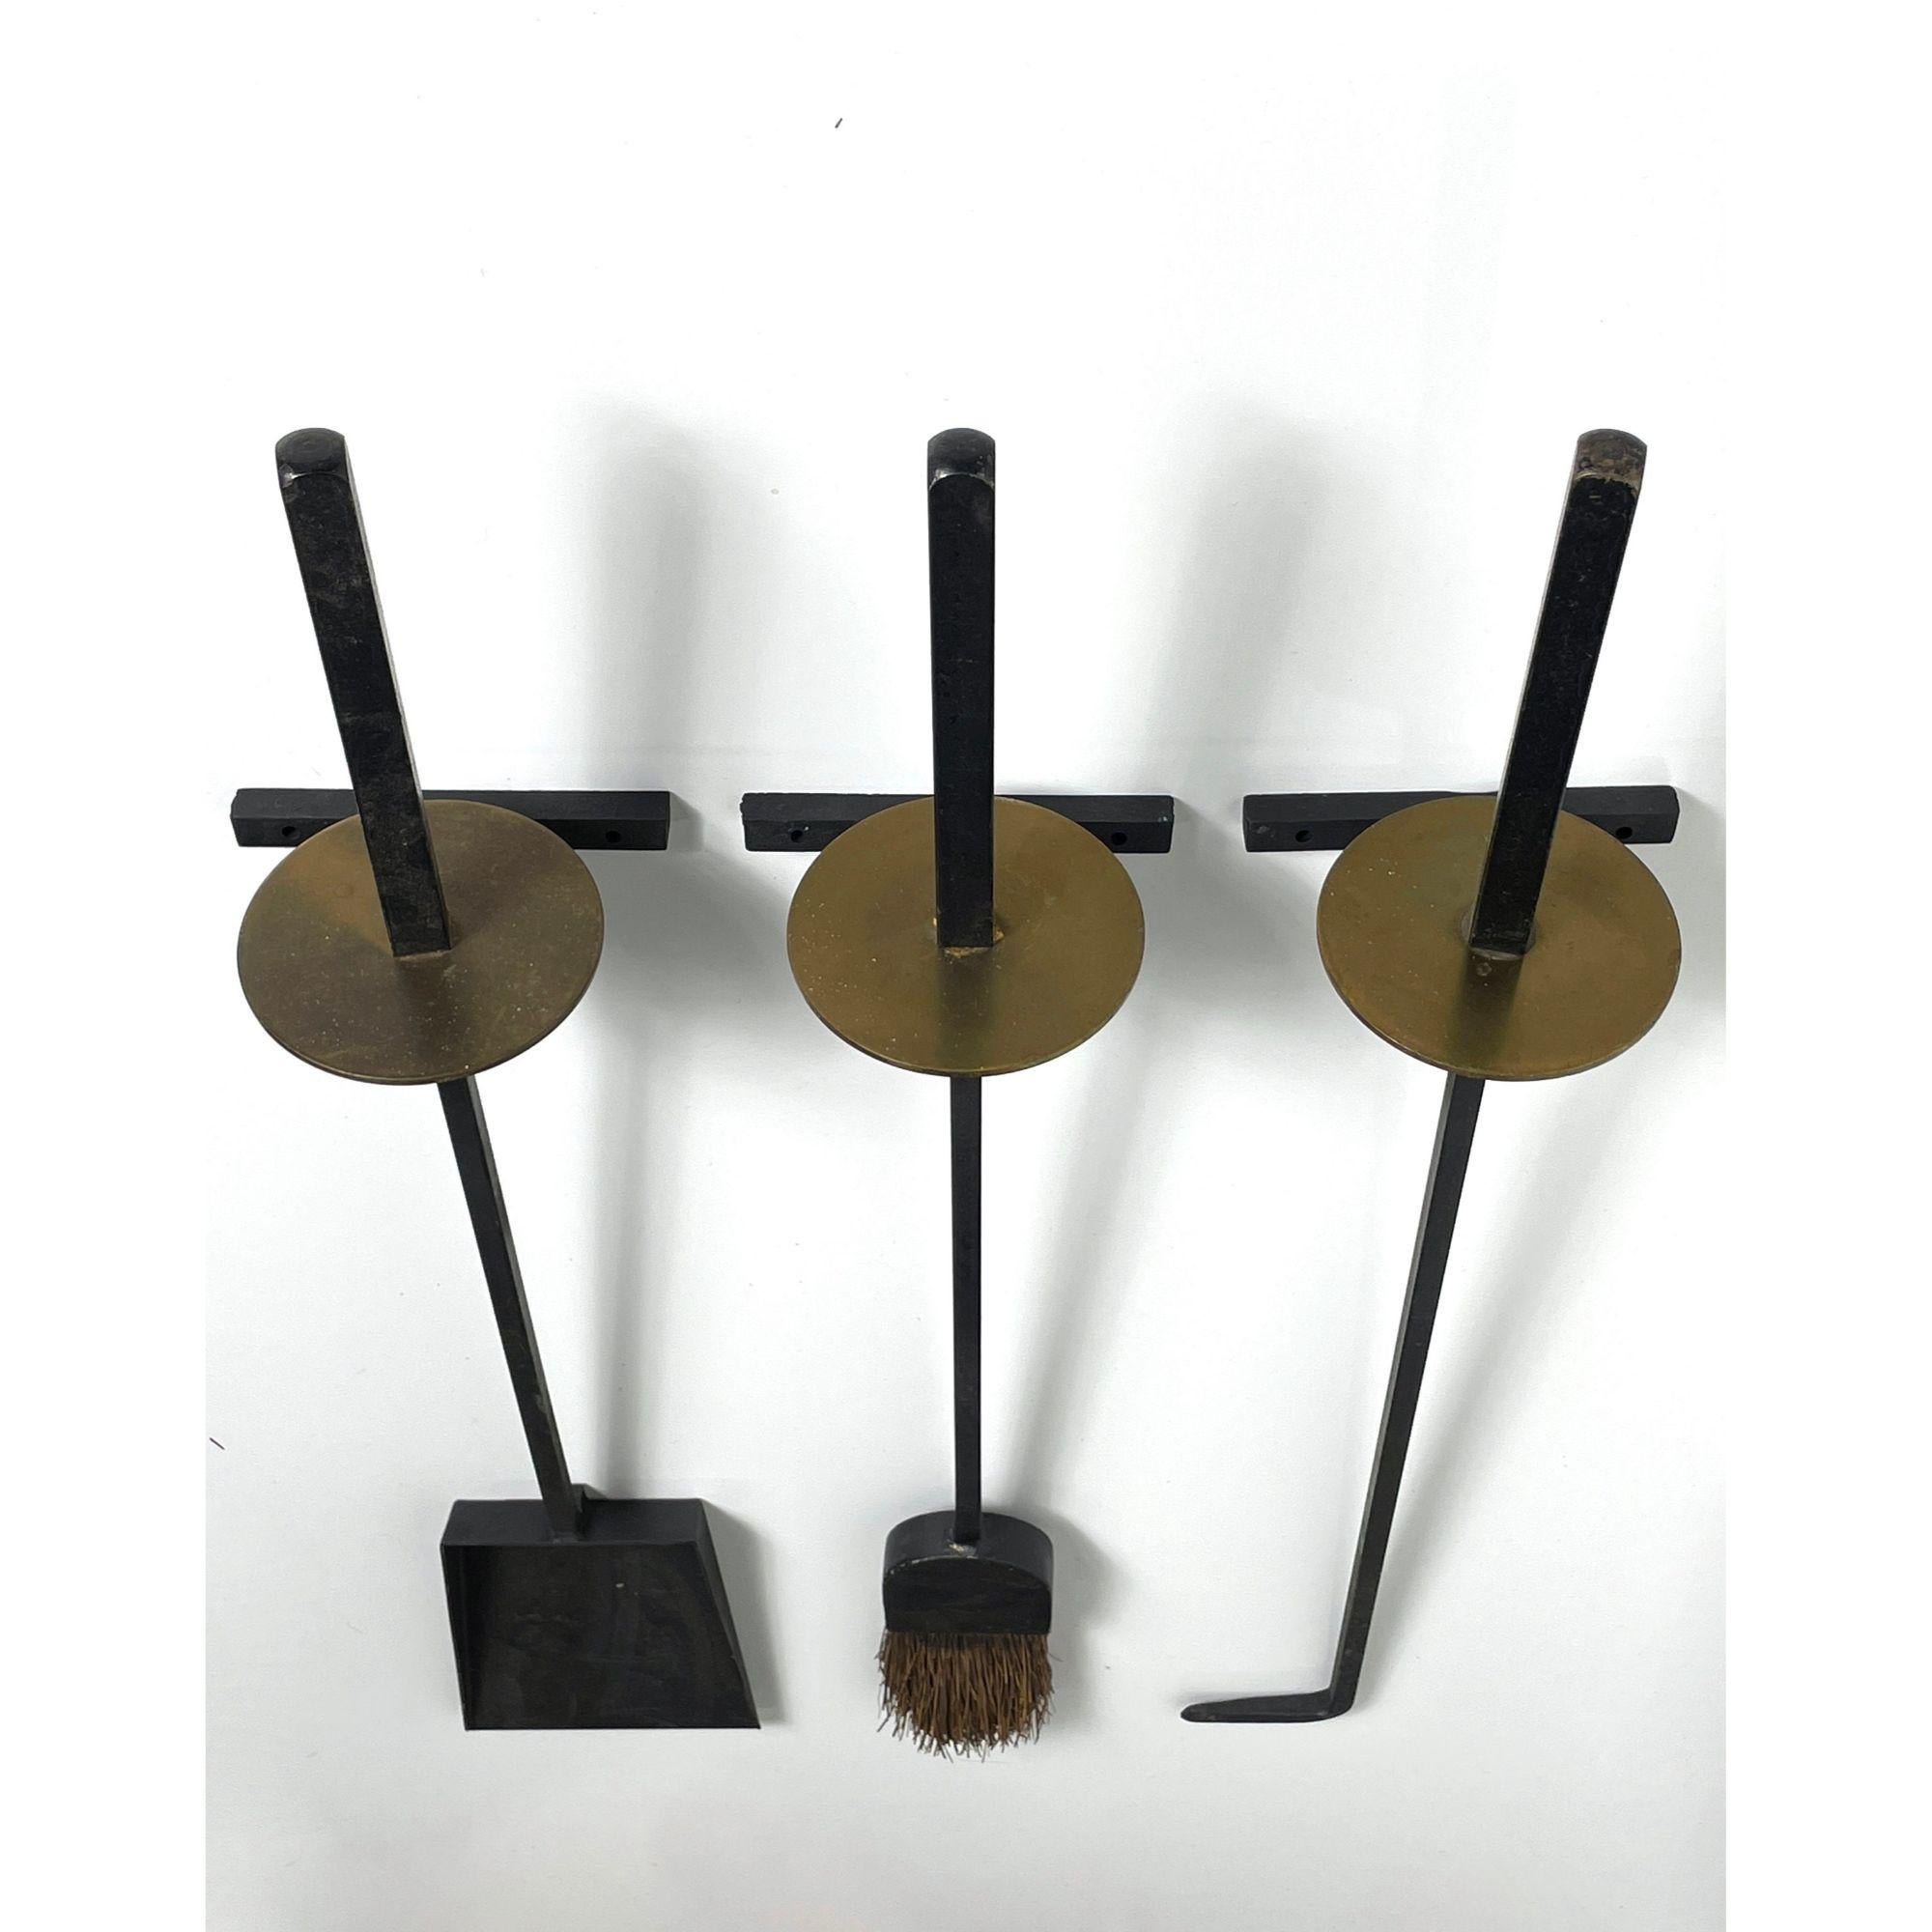 Vintage Mel Bogart Iron Brass Wall Mounted Fireplace Tool Set 

Set of wall mounted modernist fireplace tools designed by Mel Bogart 1951
Manufactured by Stewart Winthrop and selected by Good Design
Iron and brass shovel brush and poker

Additional